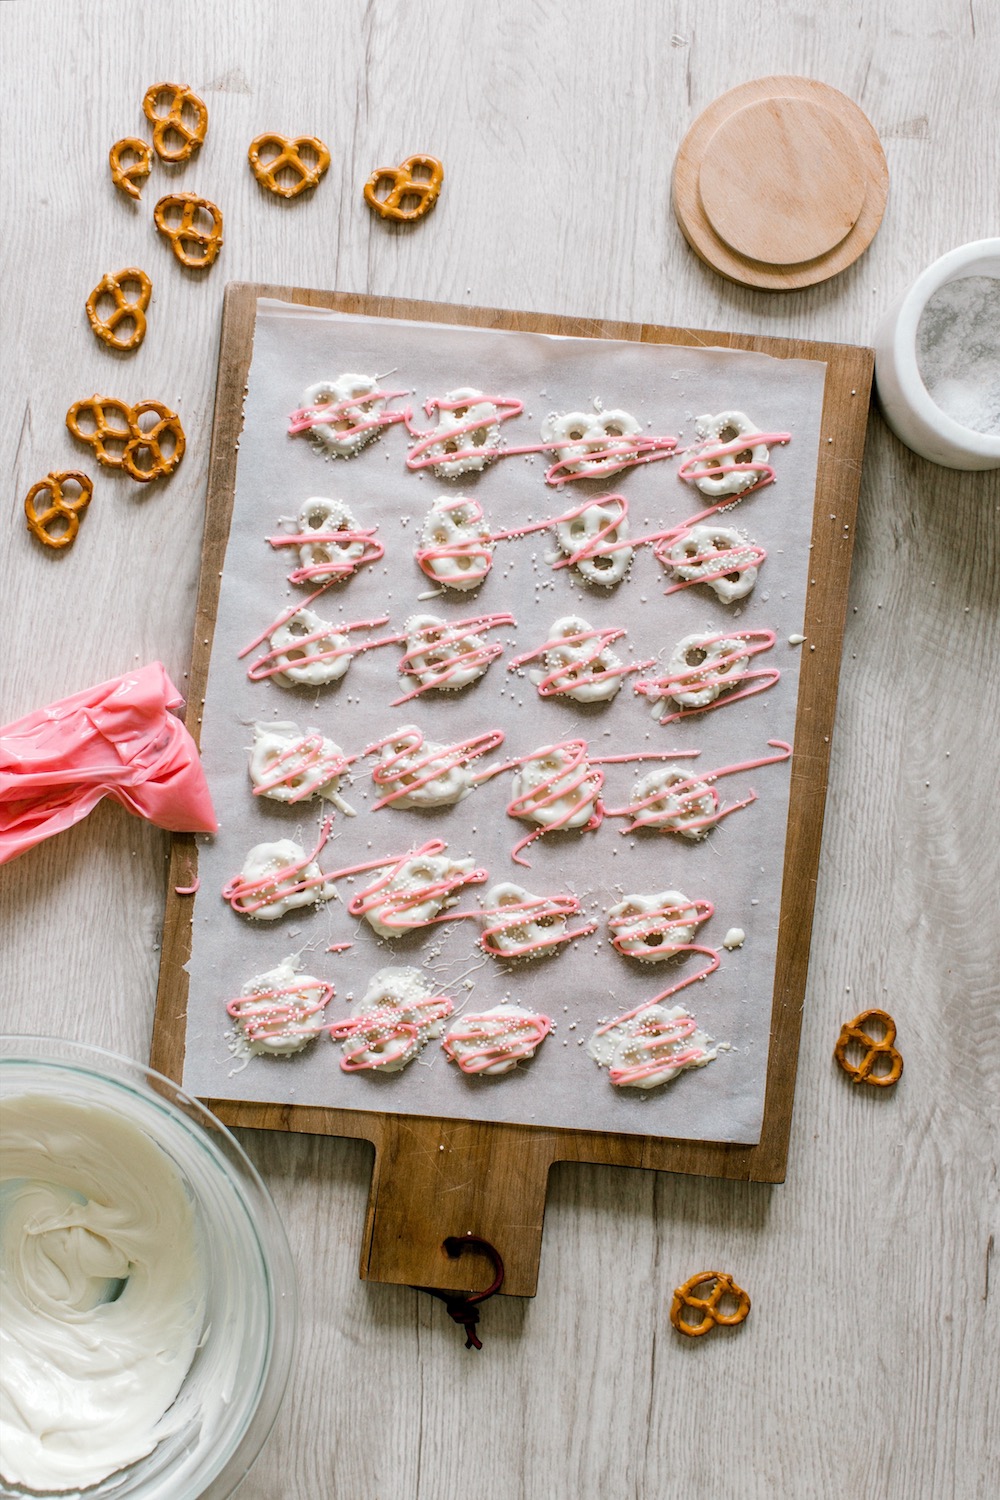 decorate your own white chocolate covered pretzels for valentine's day